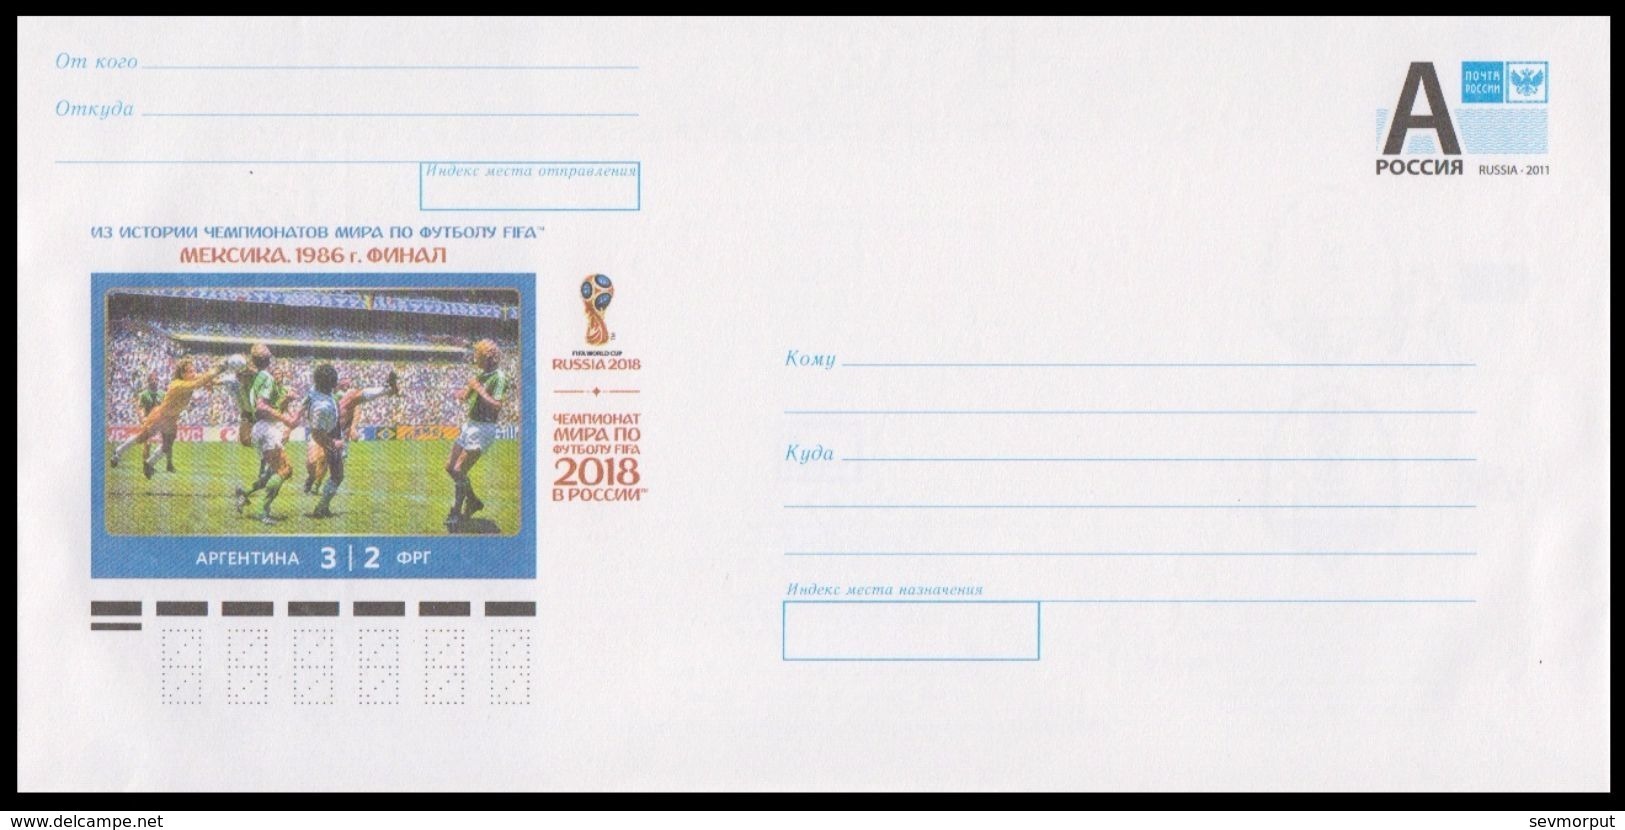 RUSSIA 2017 ENTIER COVER 062 Mint WC-2018 FOOTBALL SOCCER WORLD CUP MEXICO FINAL 1986 Argentina Germany SPORT - 2018 – Russia